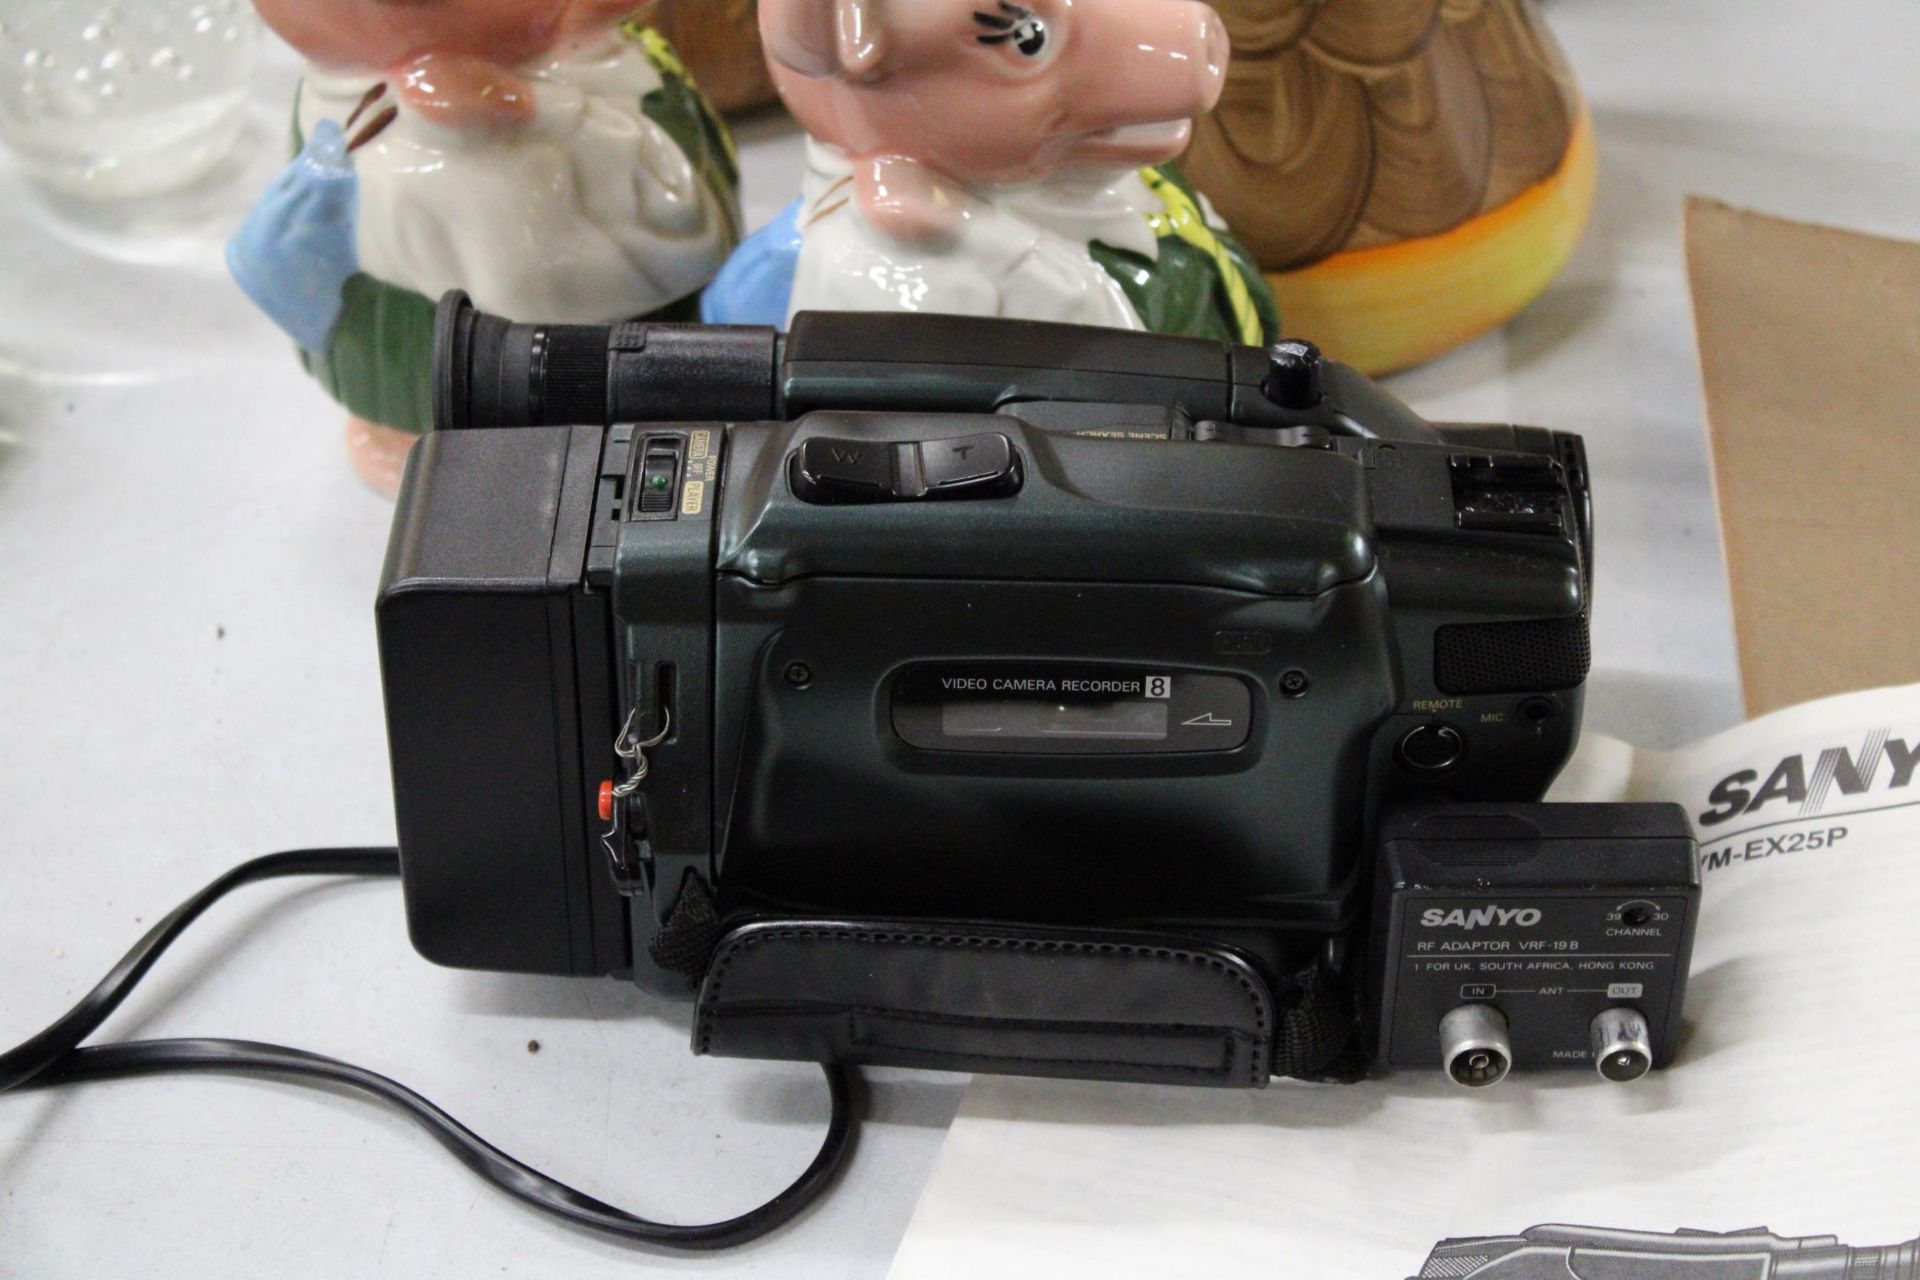 A SANYO, 8MM, CAMCORDER, VM-EX25P, WITH INSTRUCTIONS - Image 5 of 7